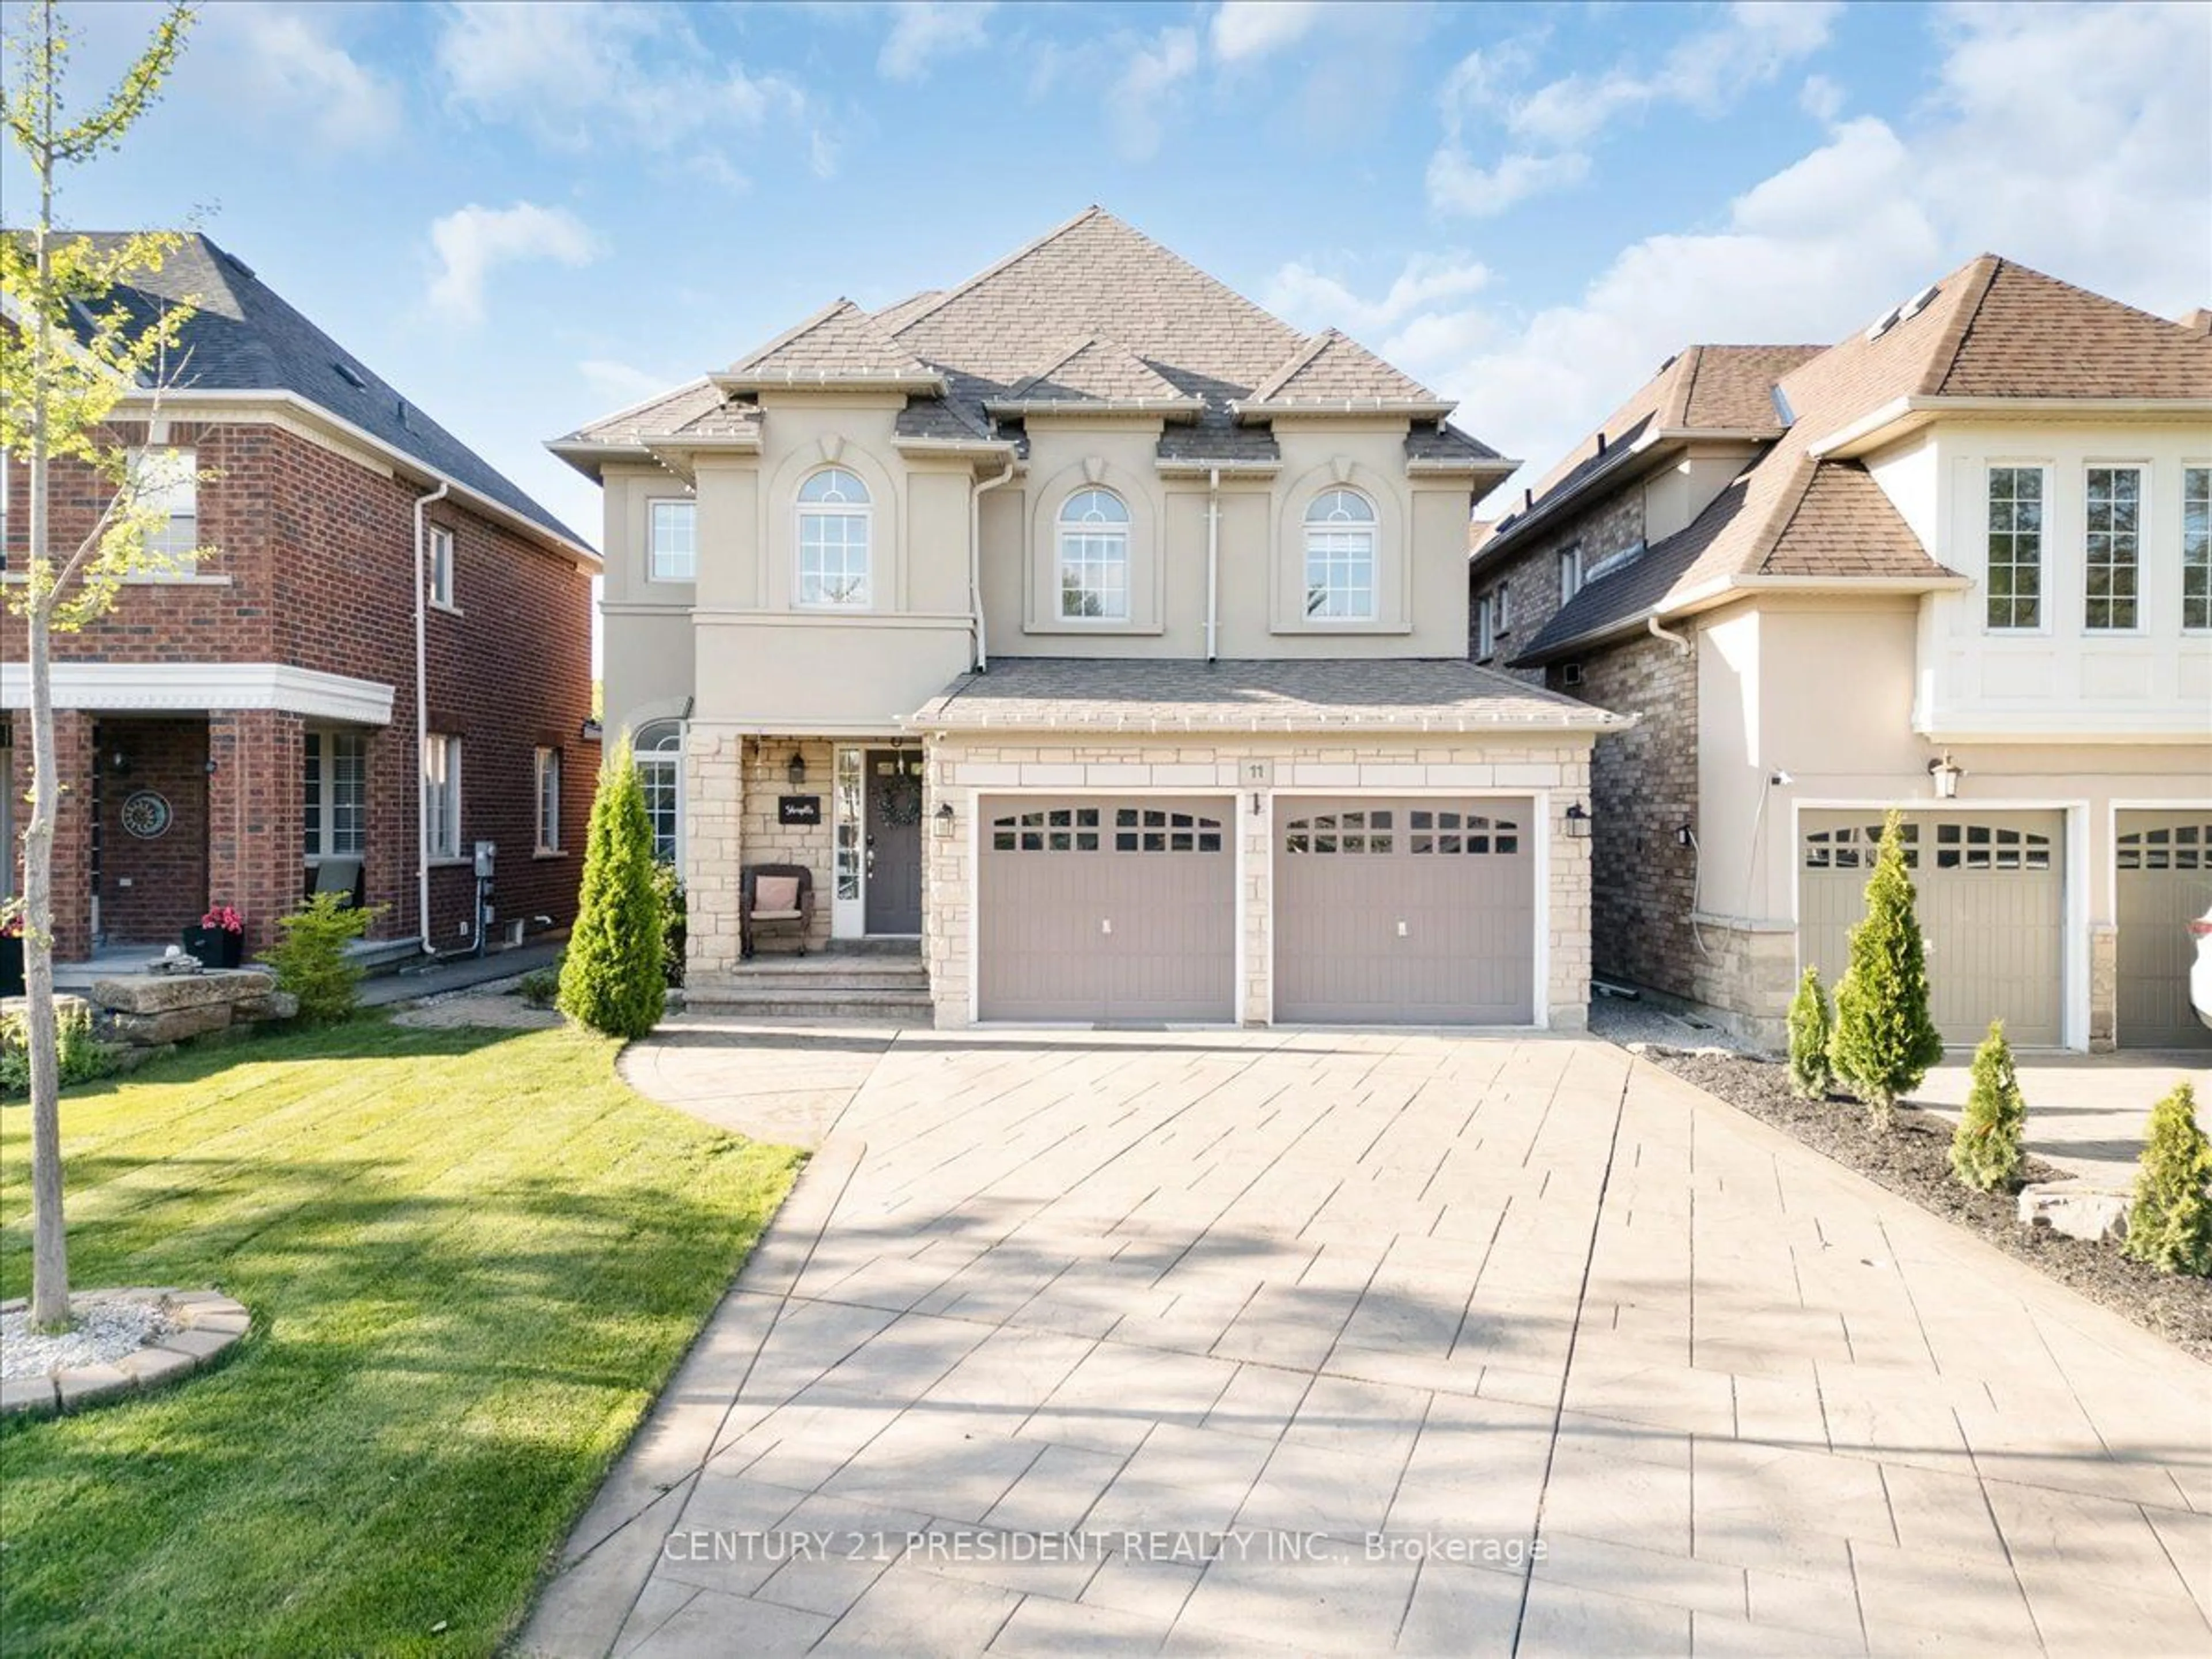 Home with brick exterior material for 11 Sorbonne Dr, Brampton Ontario L6P 1W5